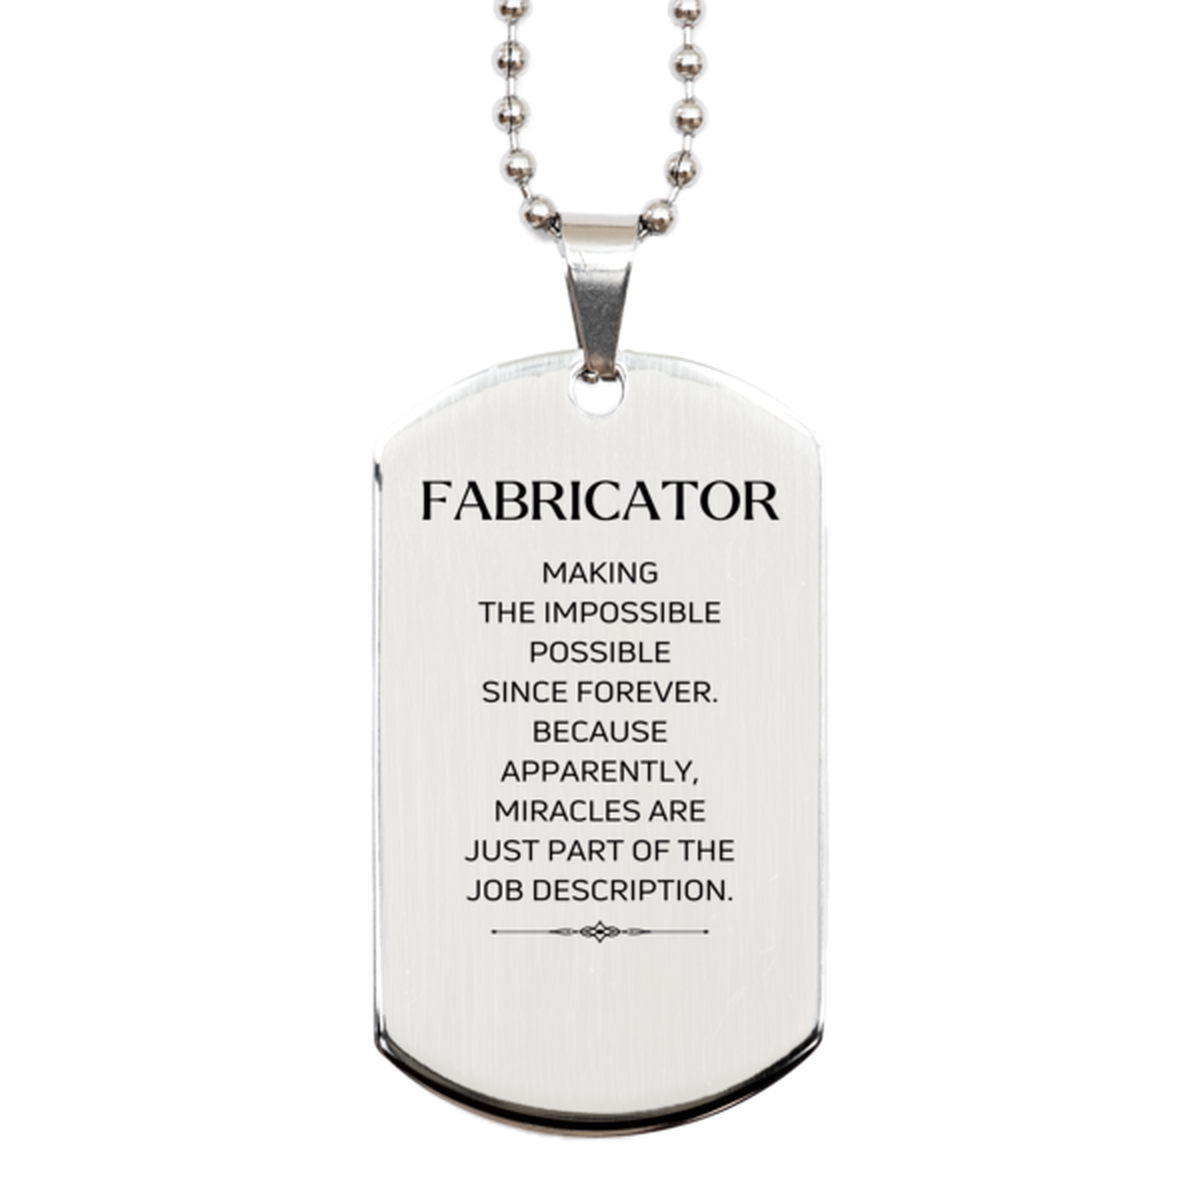 Funny Fabricator Gifts, Miracles are just part of the job description, Inspirational Birthday Silver Dog Tag For Fabricator, Men, Women, Coworkers, Friends, Boss